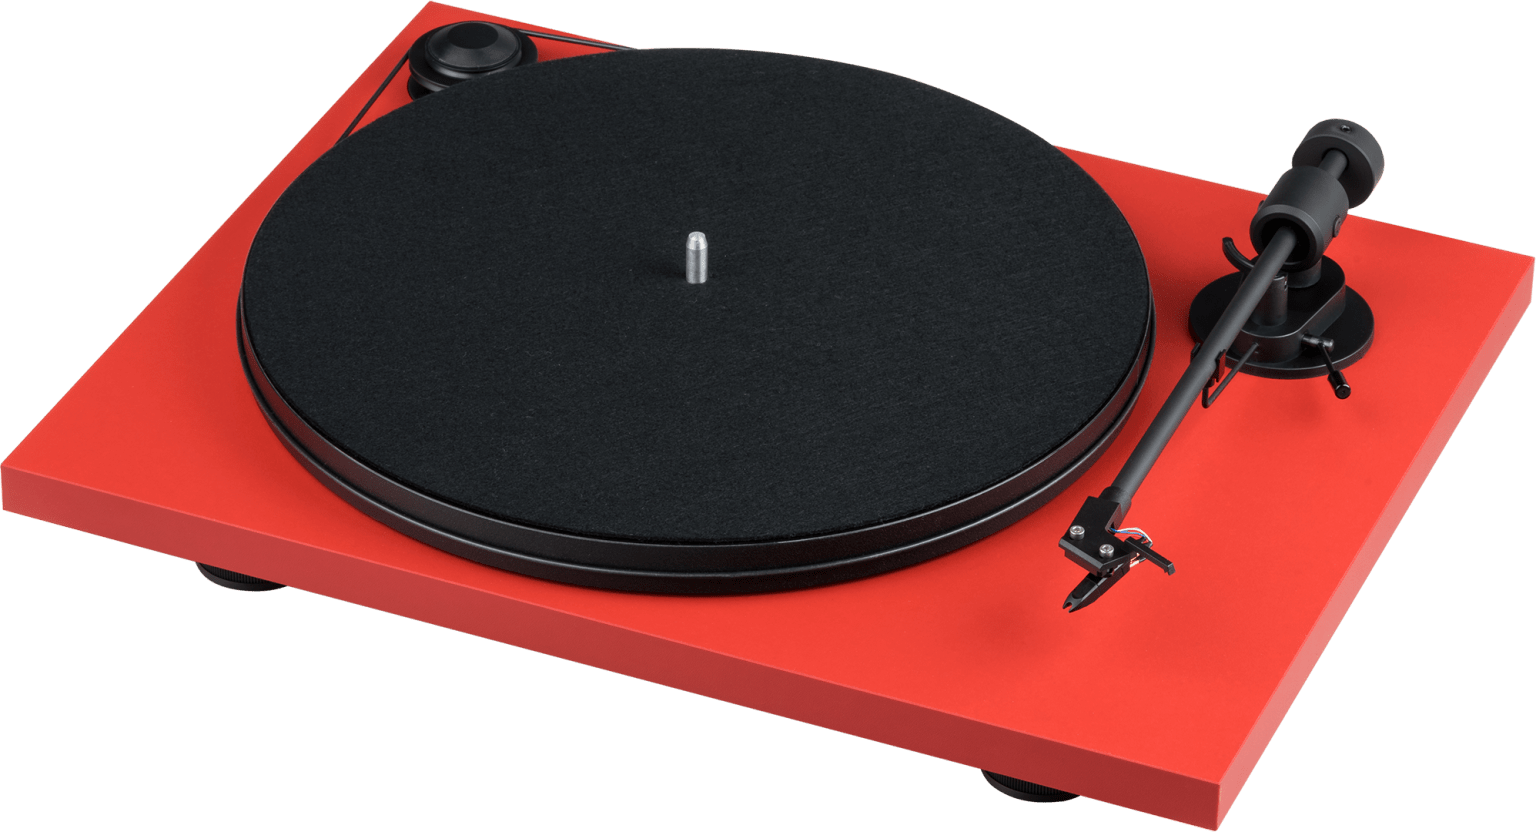 Pro-Ject - Primary E  Turntable